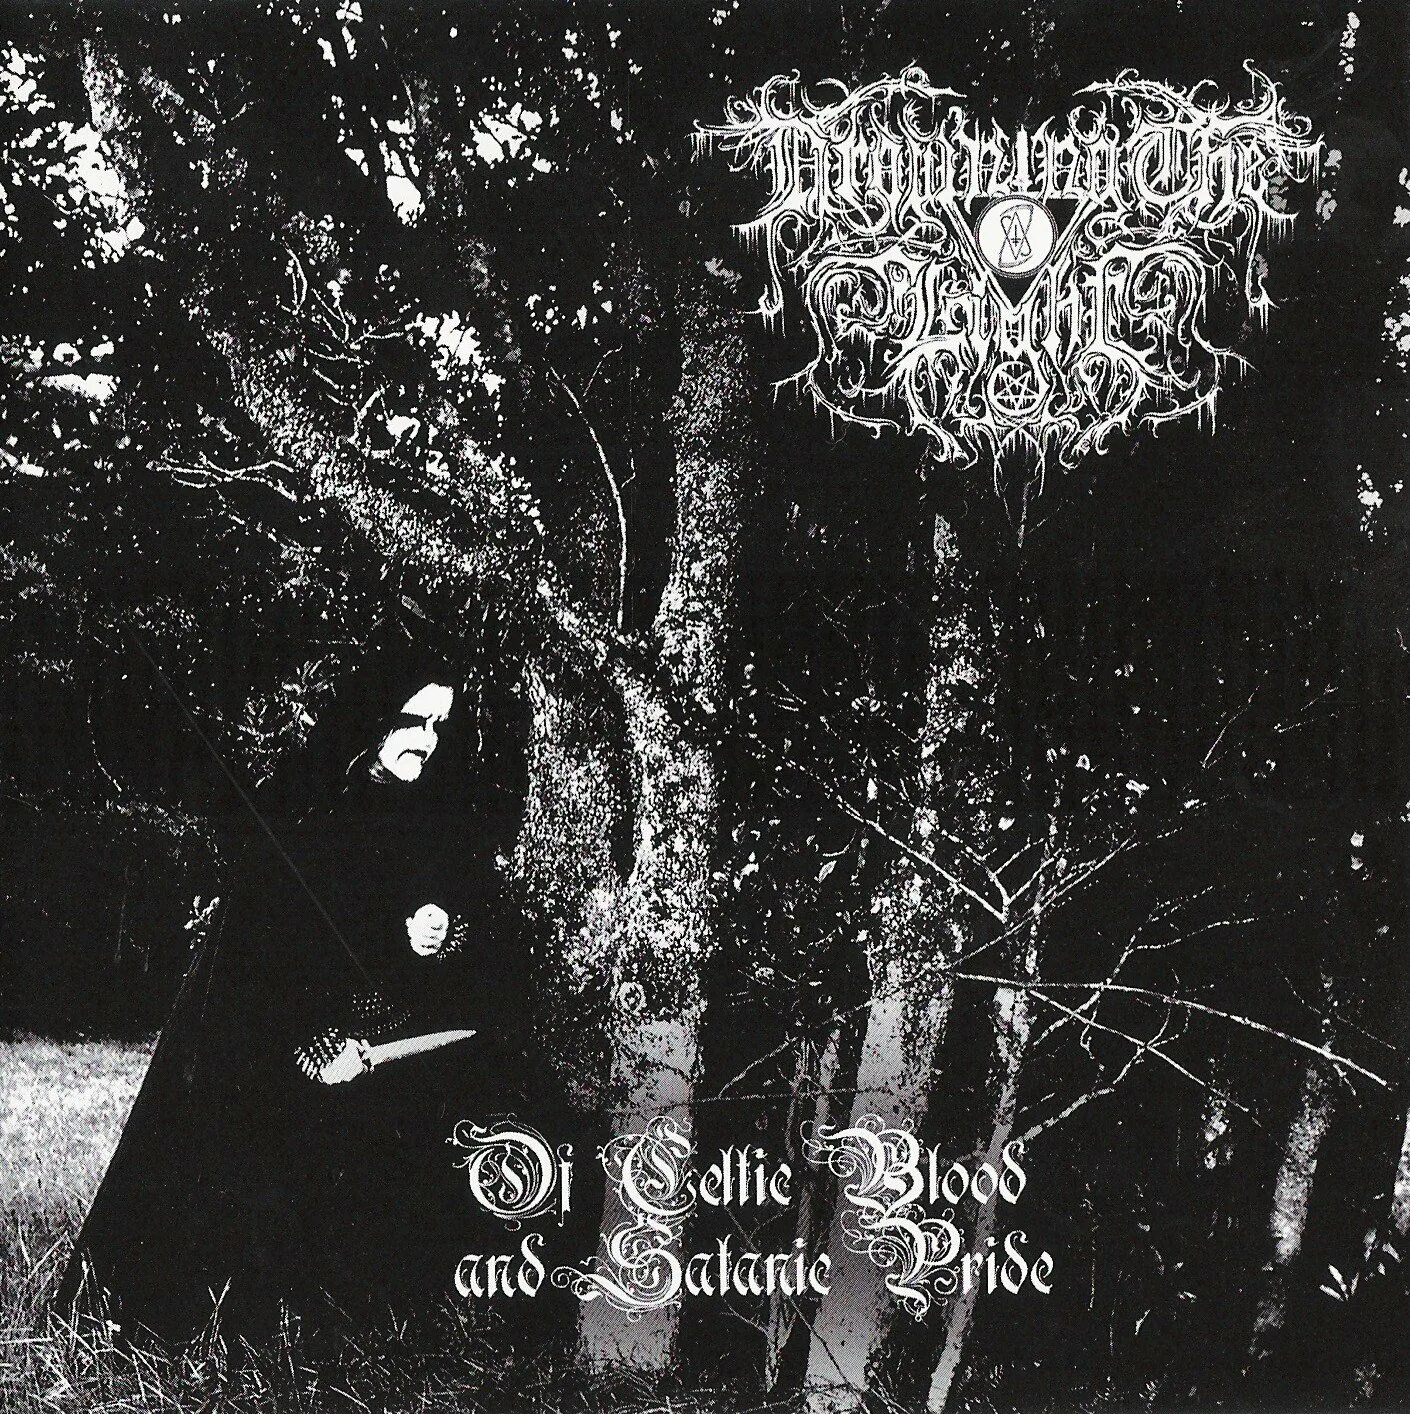 Drowning the Light - of Celtic Blood and Satanic Pride (2007). Celtic Blood - Celtic Blood. Drowning the Light Drowned.